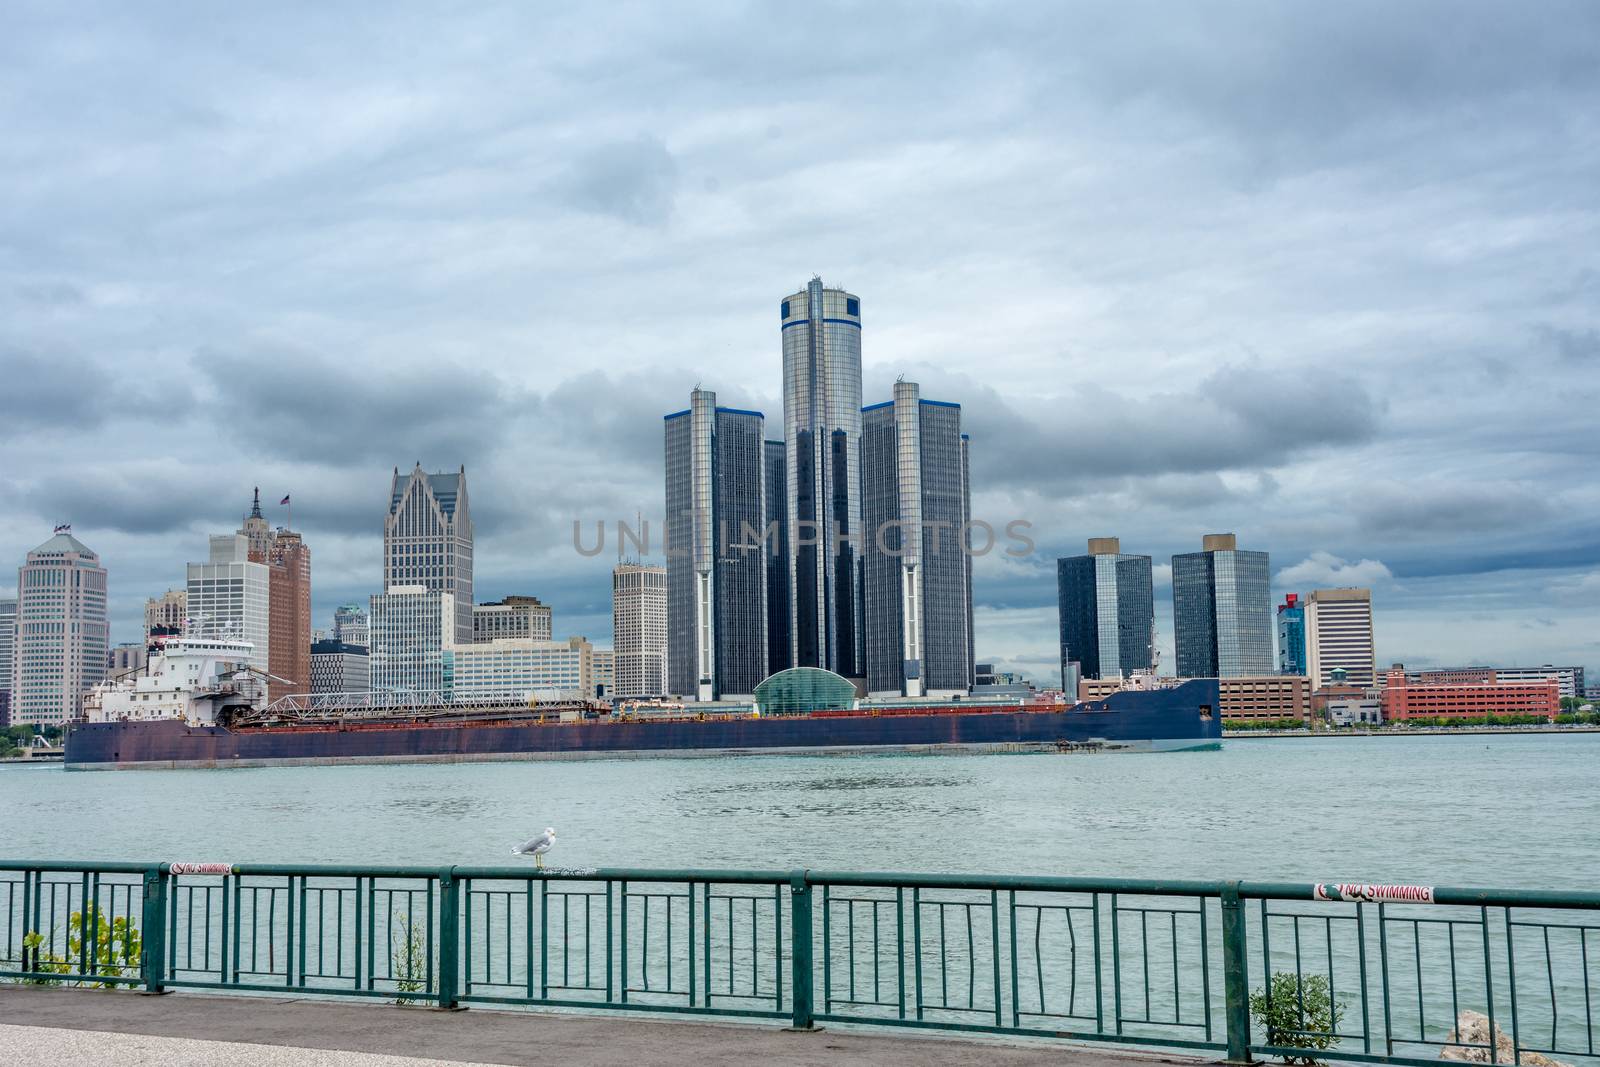 Panorama with high-rise buildings of GM against the sky from gray clouds with a barge floating on the river